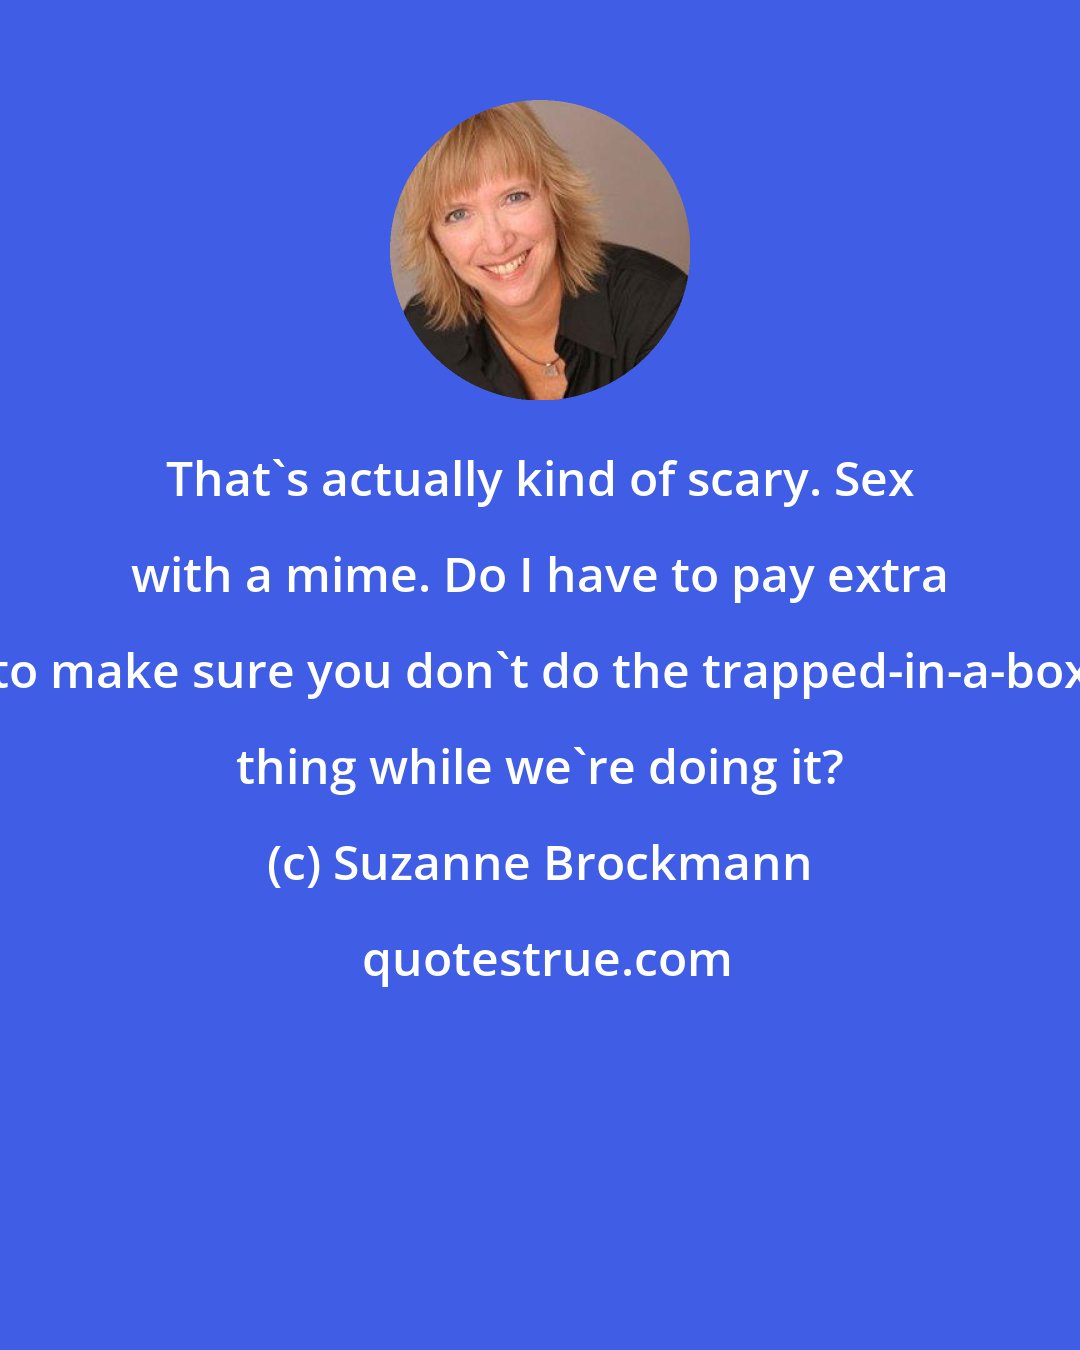 Suzanne Brockmann: That's actually kind of scary. Sex with a mime. Do I have to pay extra to make sure you don't do the trapped-in-a-box thing while we're doing it?